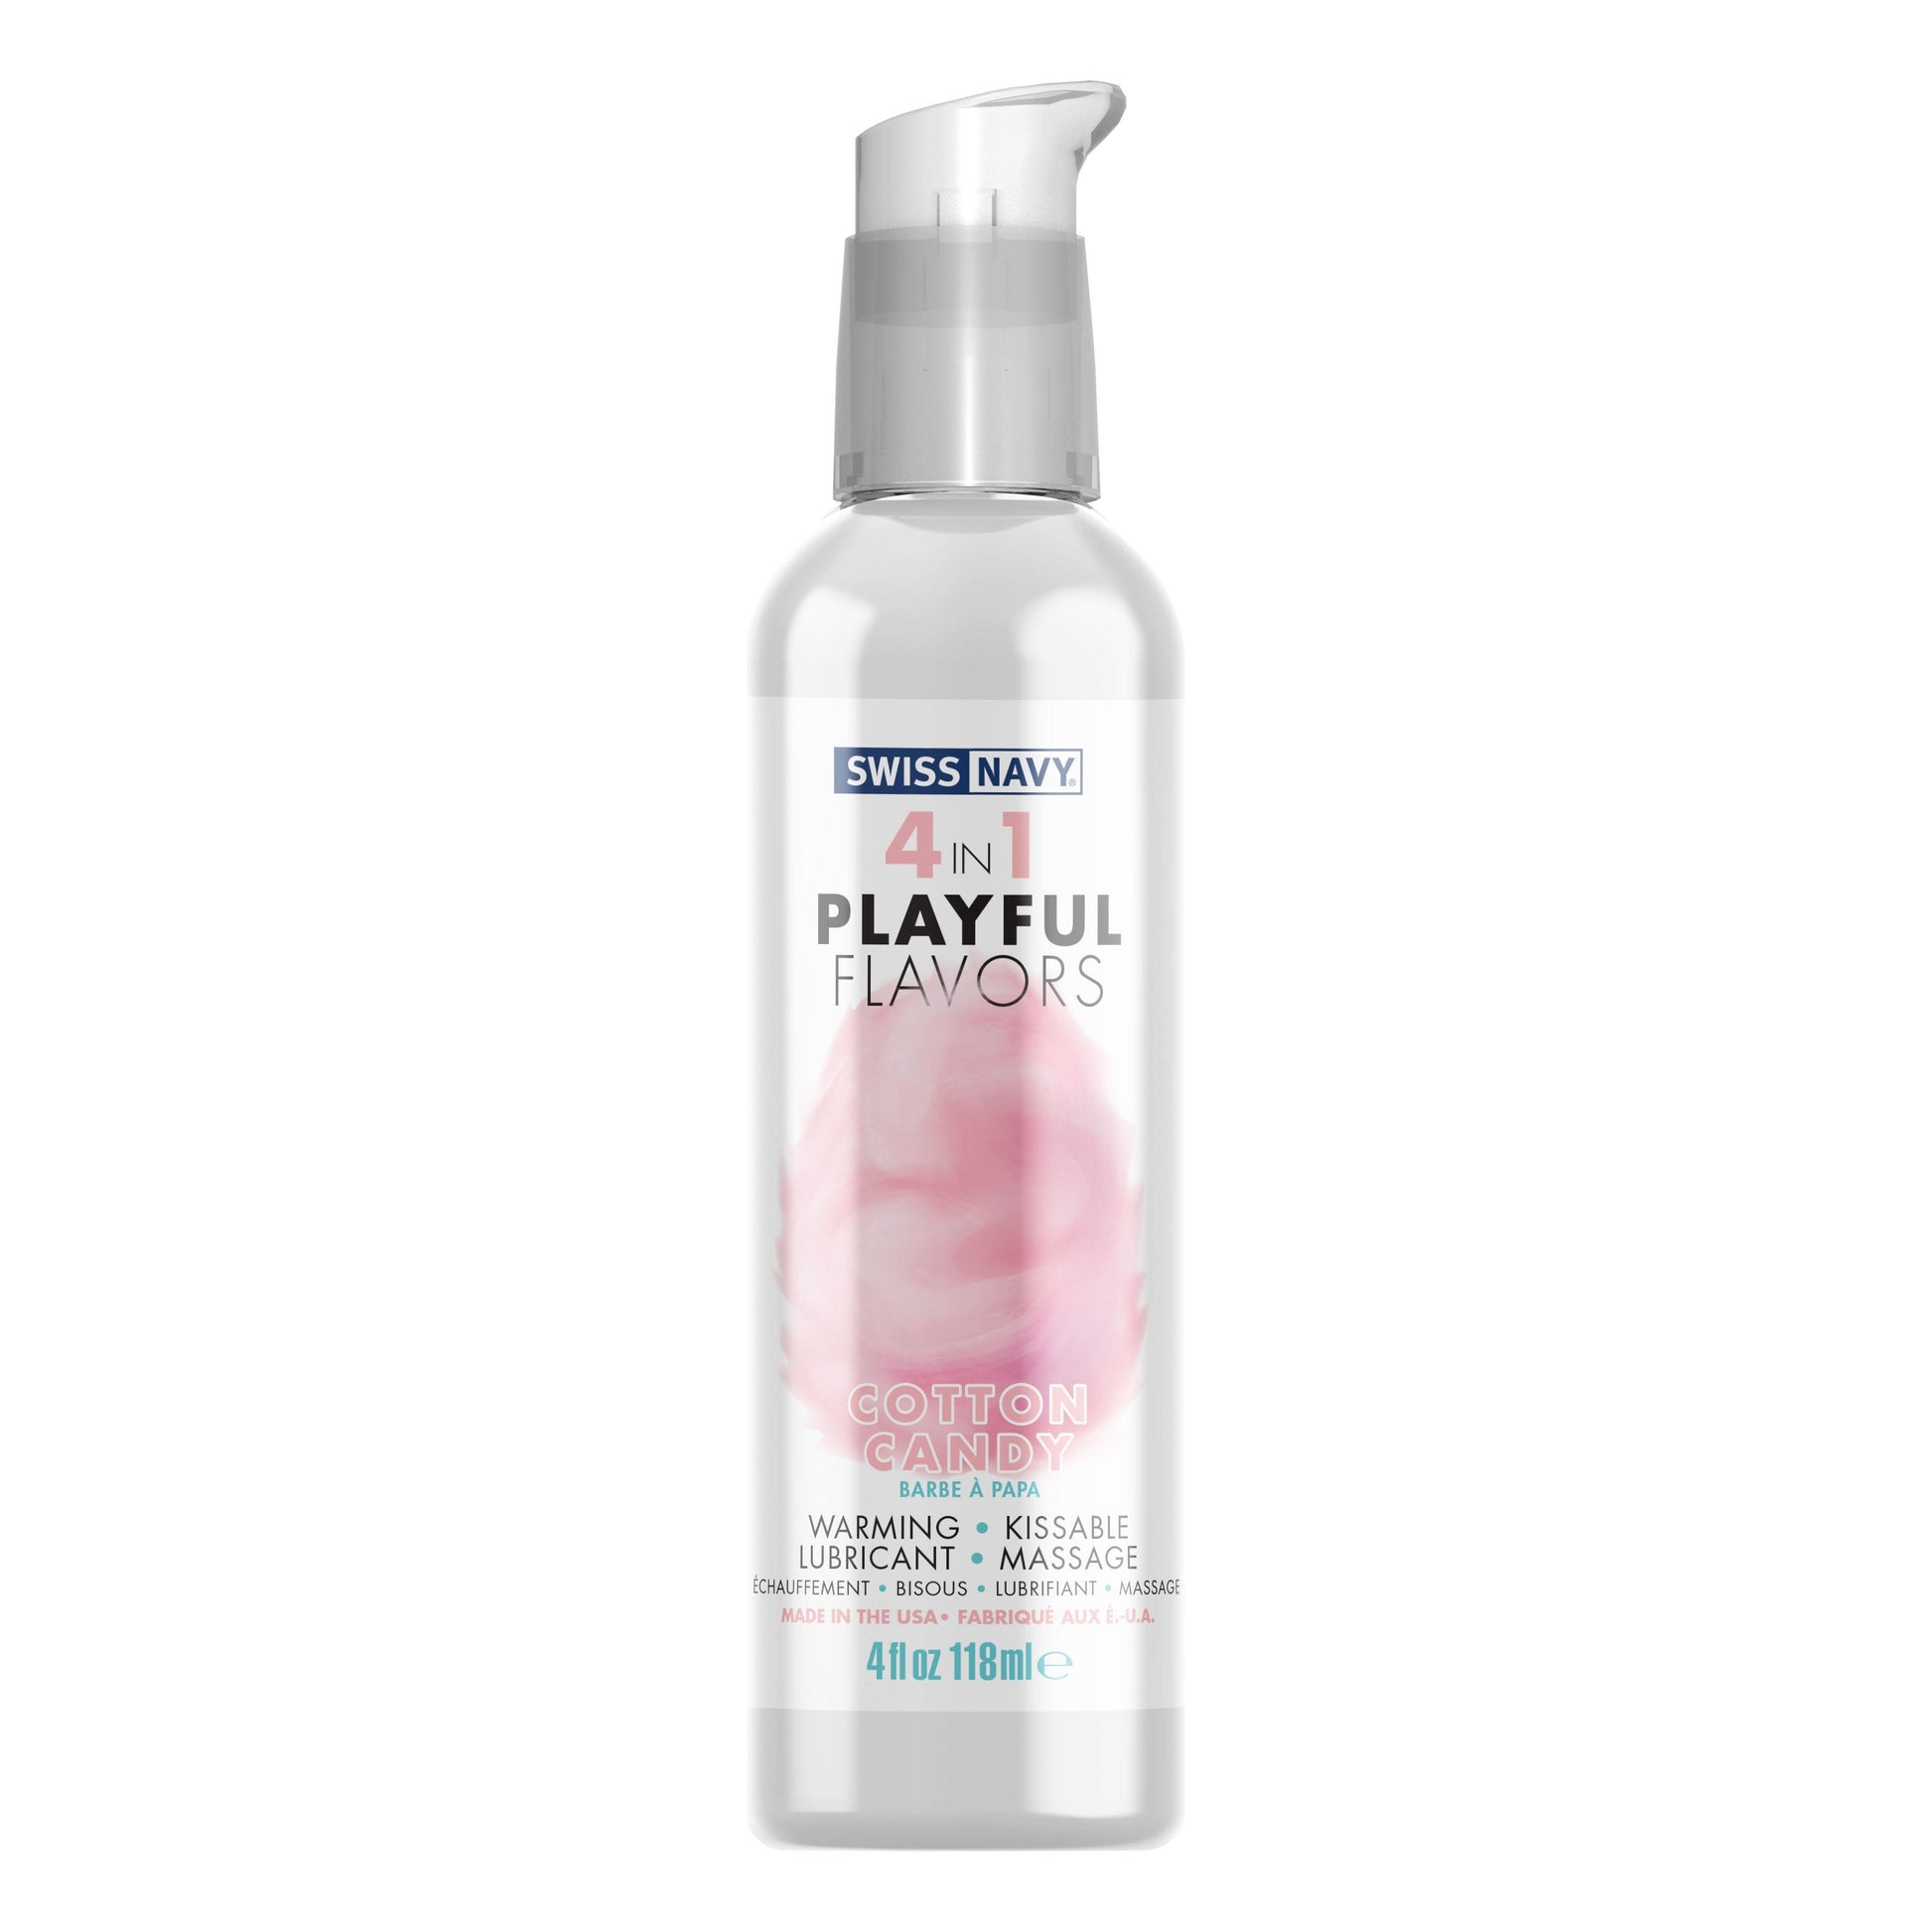 Swiss Navy 4-in-1 Playful Flavors - Cotton Candy 4 Oz MD-SN4N1FCC4